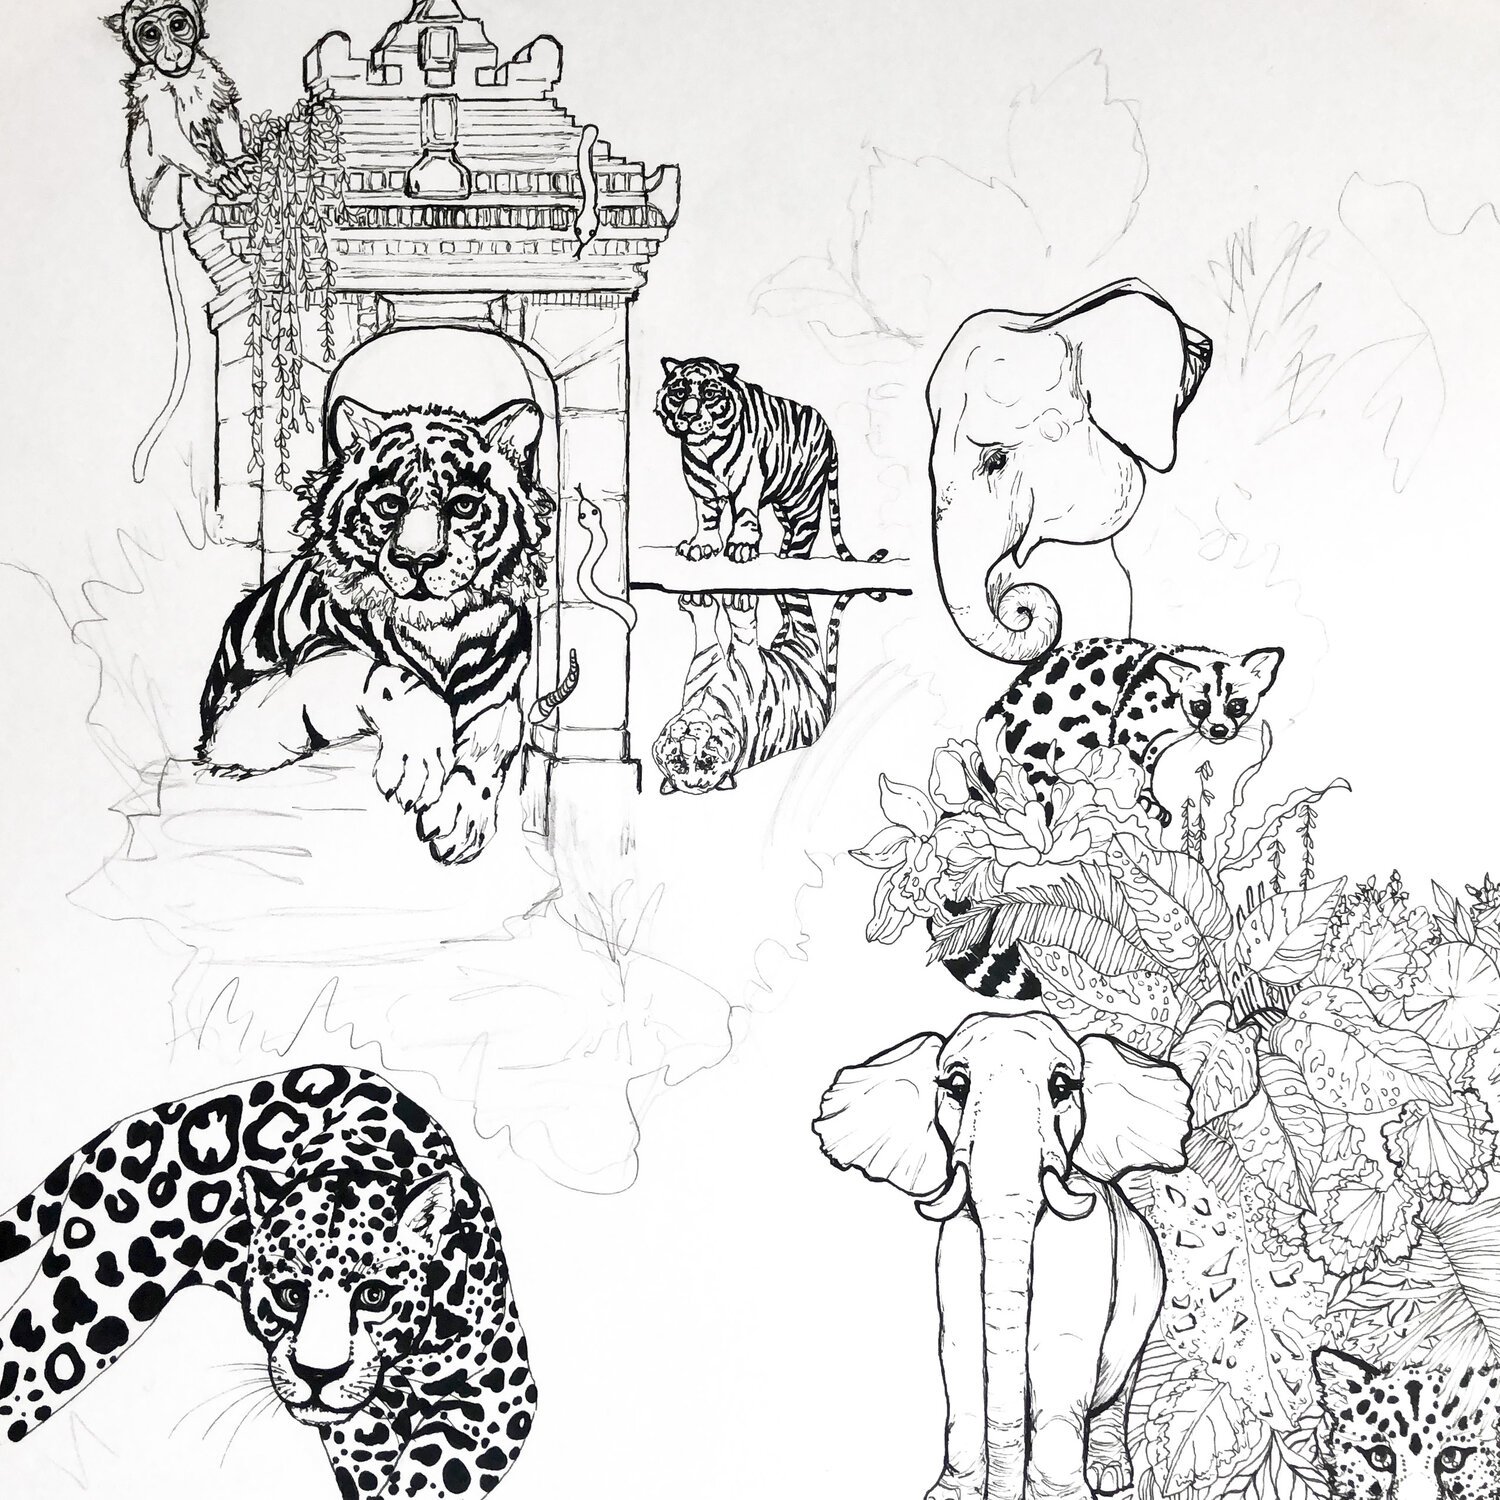 Elephant, Tiger and Leopard Illustration in Pen by Marcella Wylie